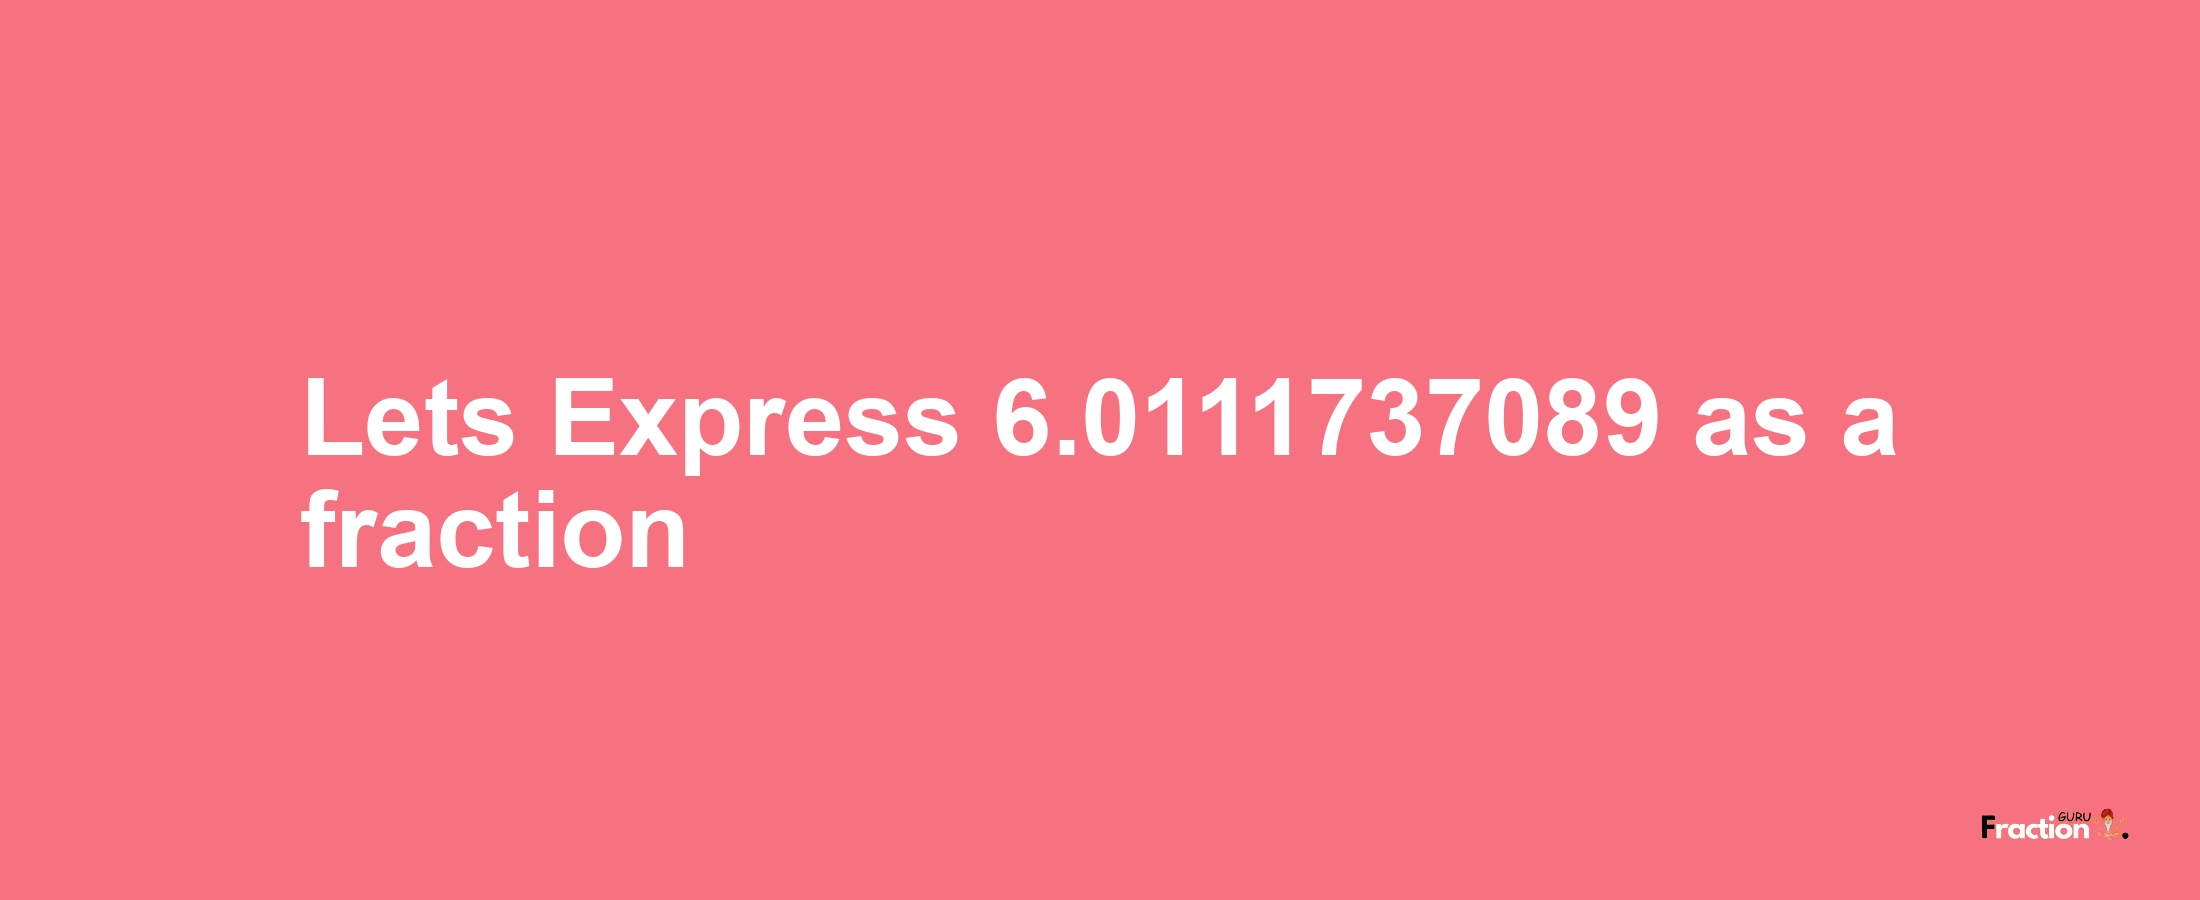 Lets Express 6.0111737089 as afraction